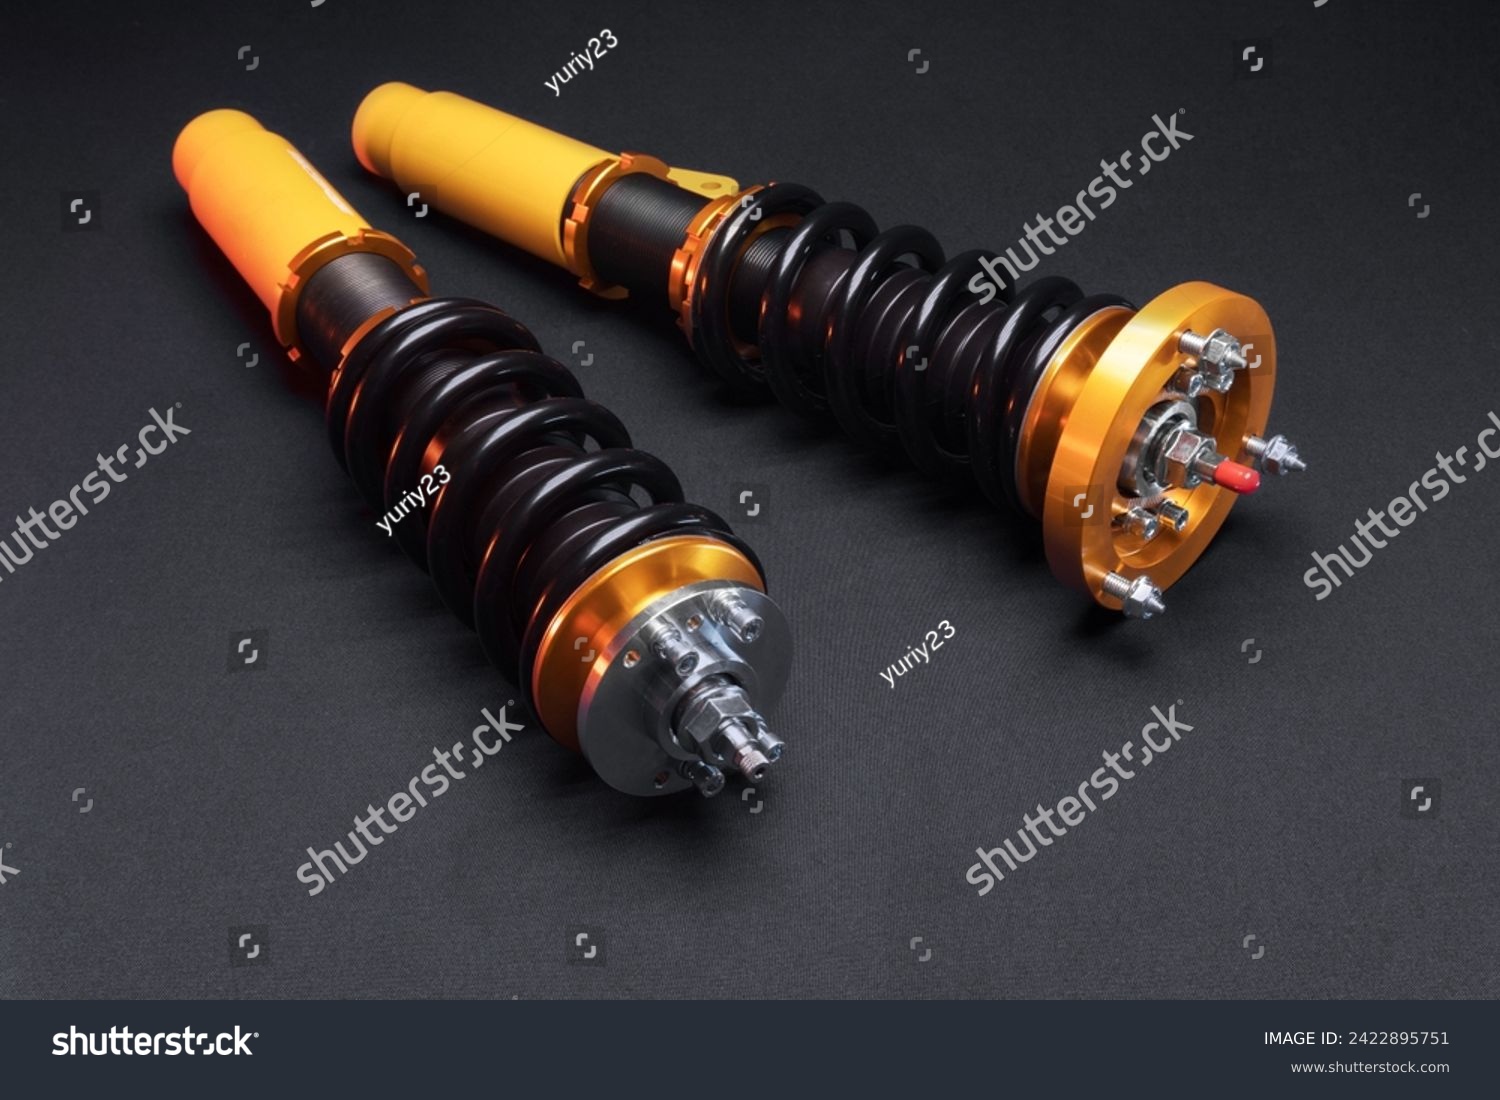 suspension tuning, coilovers, shock absorbers and front springs in yellow and gold colors for a sports drift car on a dark background	 #2422895751